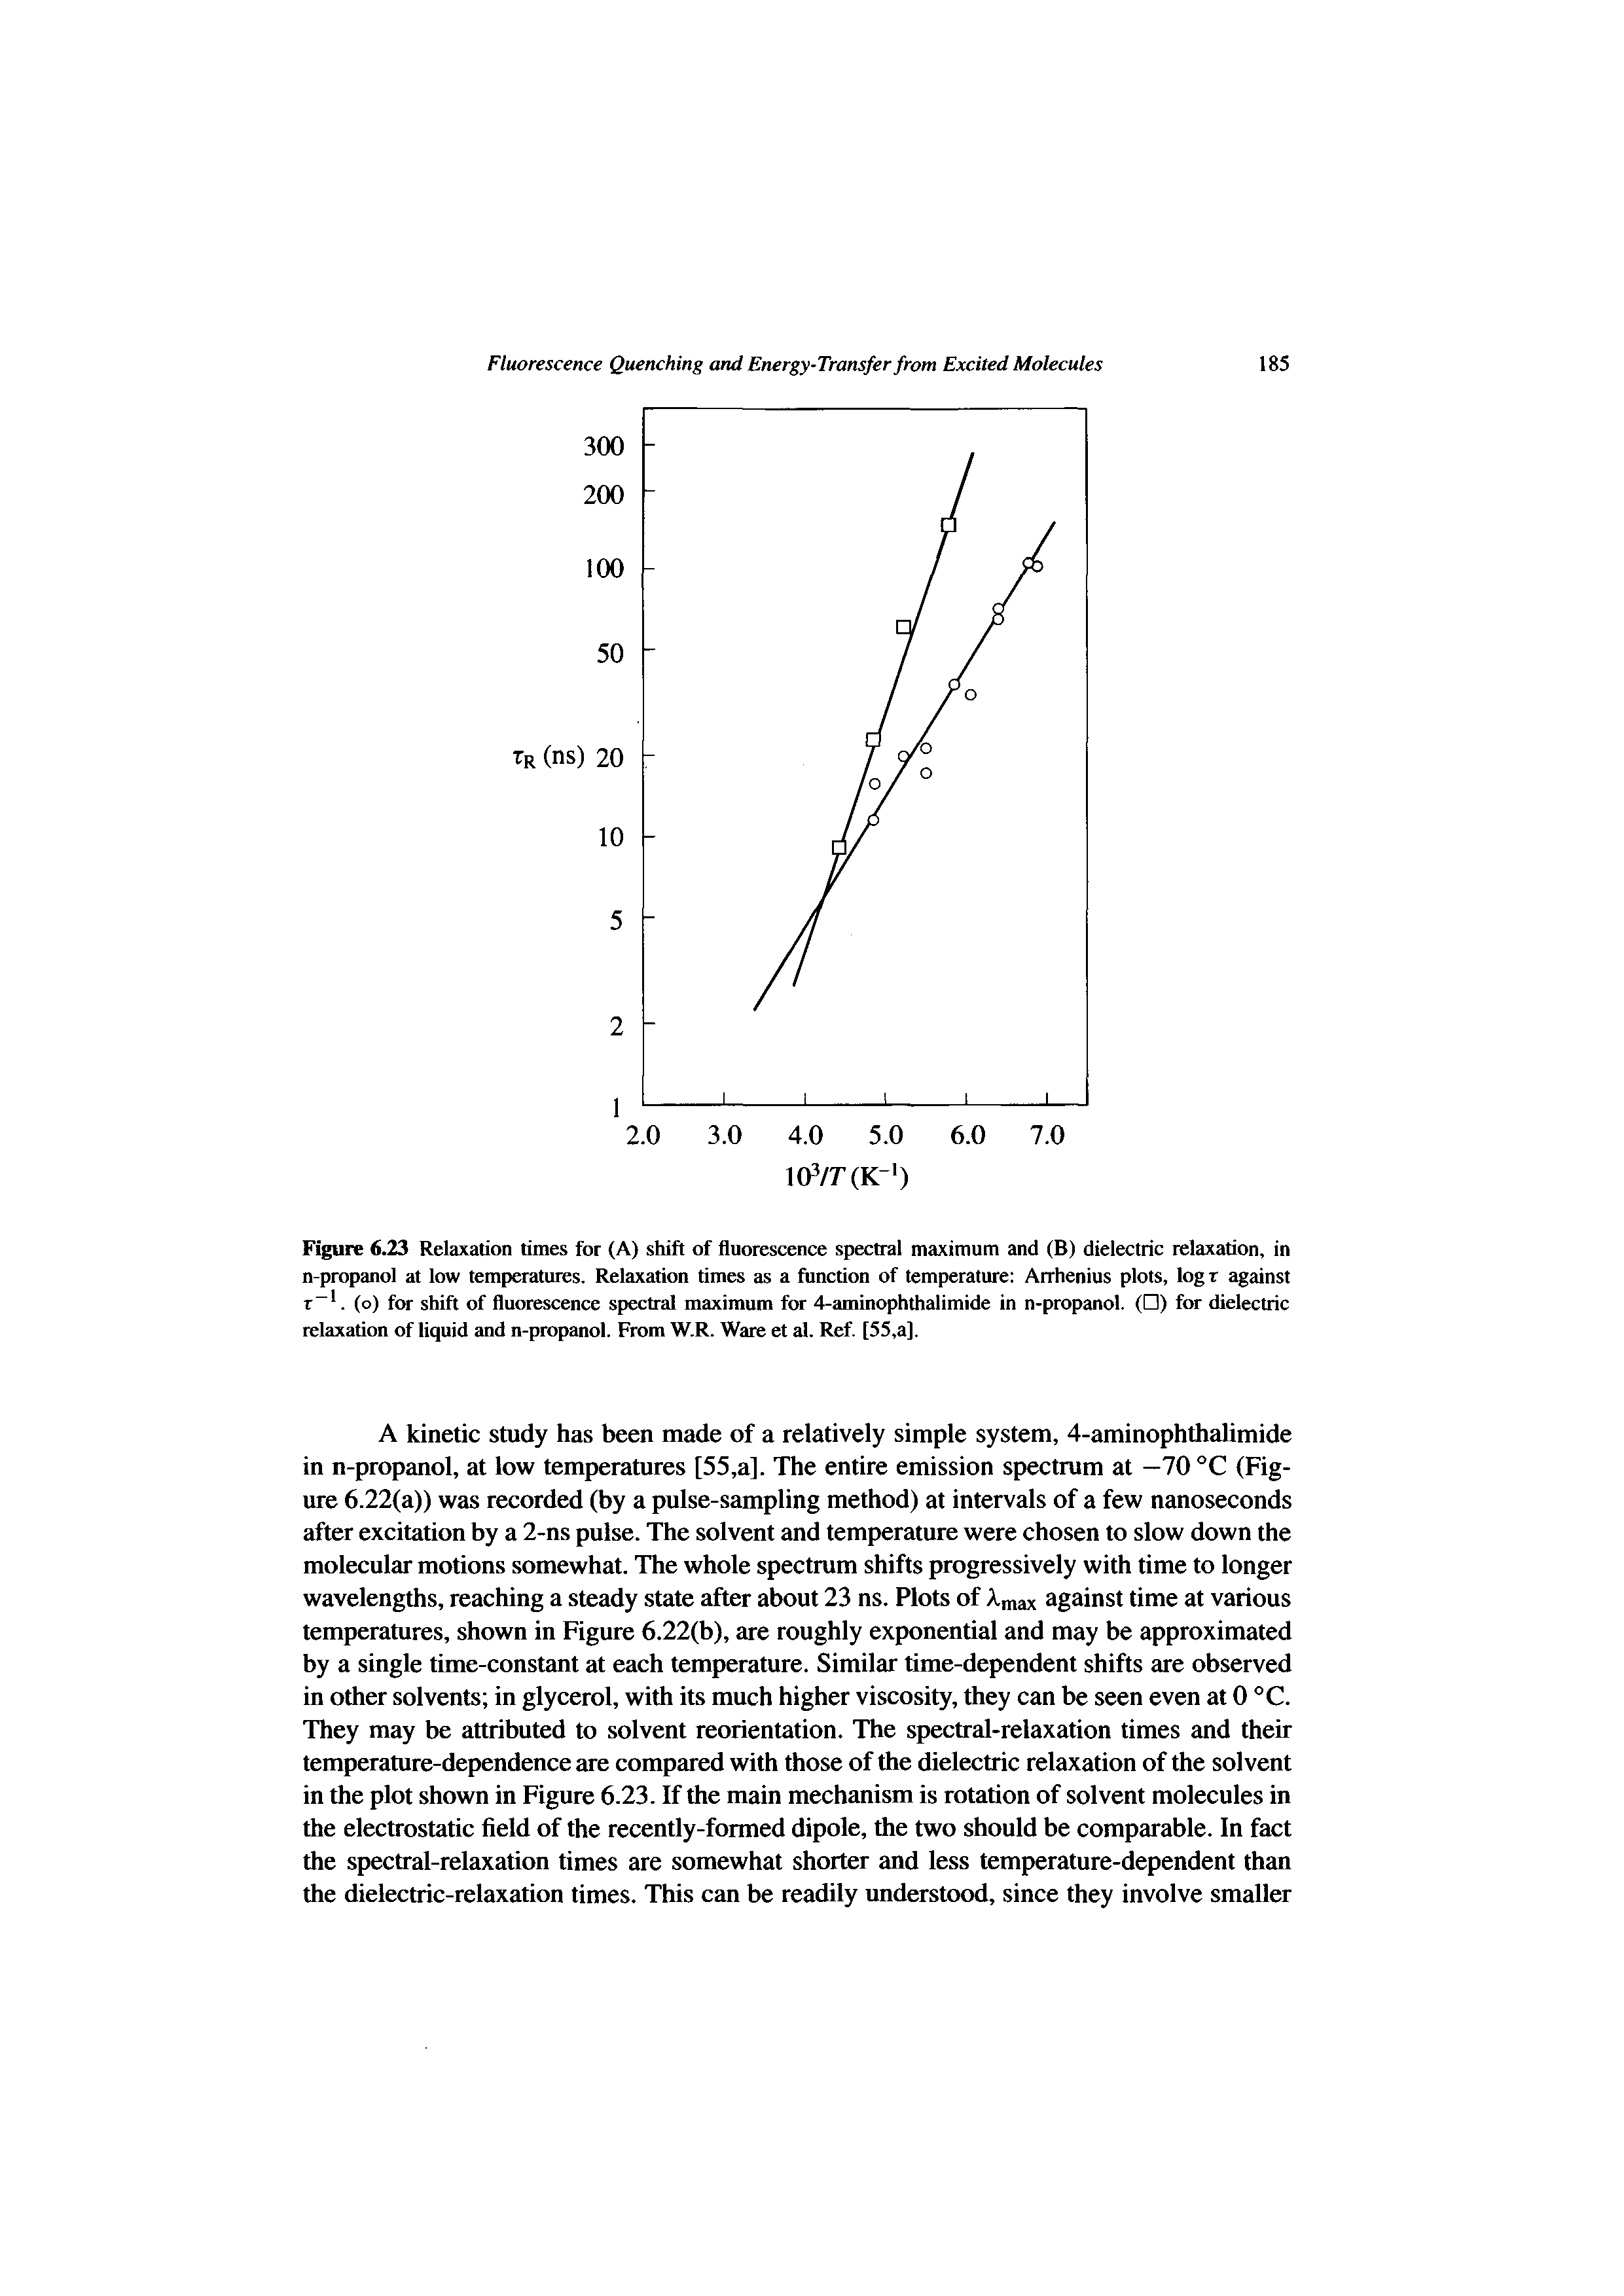 Figure 6.23 Relaxation times for (A) shift of fluorescence spectral maximum and (B) dielectric relaxation, in n-propanol at low temperatures. Relaxation times as a function of temperature Arrhenius plots, logr against r. (o) for shift of fluorescence spectral maximum for 4-aminophthalimide in n-propanol. ( ) fOT dielectric relaxation of liquid and n-propanol. From W.R. Ware et al. Ref. [55,a].